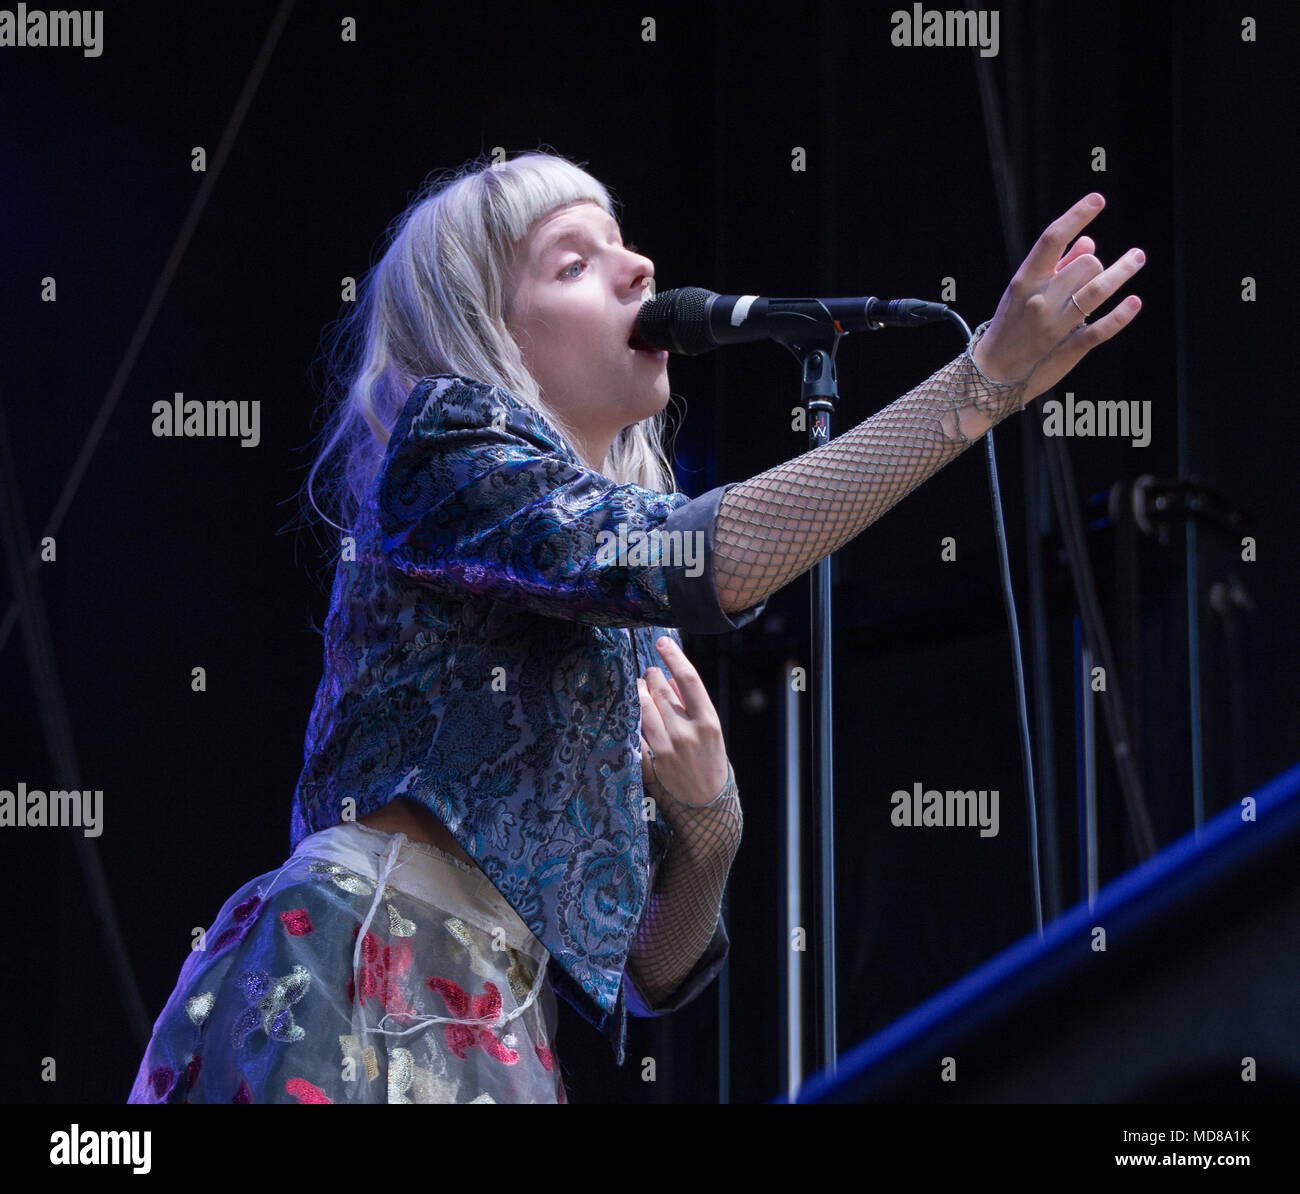 Show of the Norwegian singer Aurora on the third day of